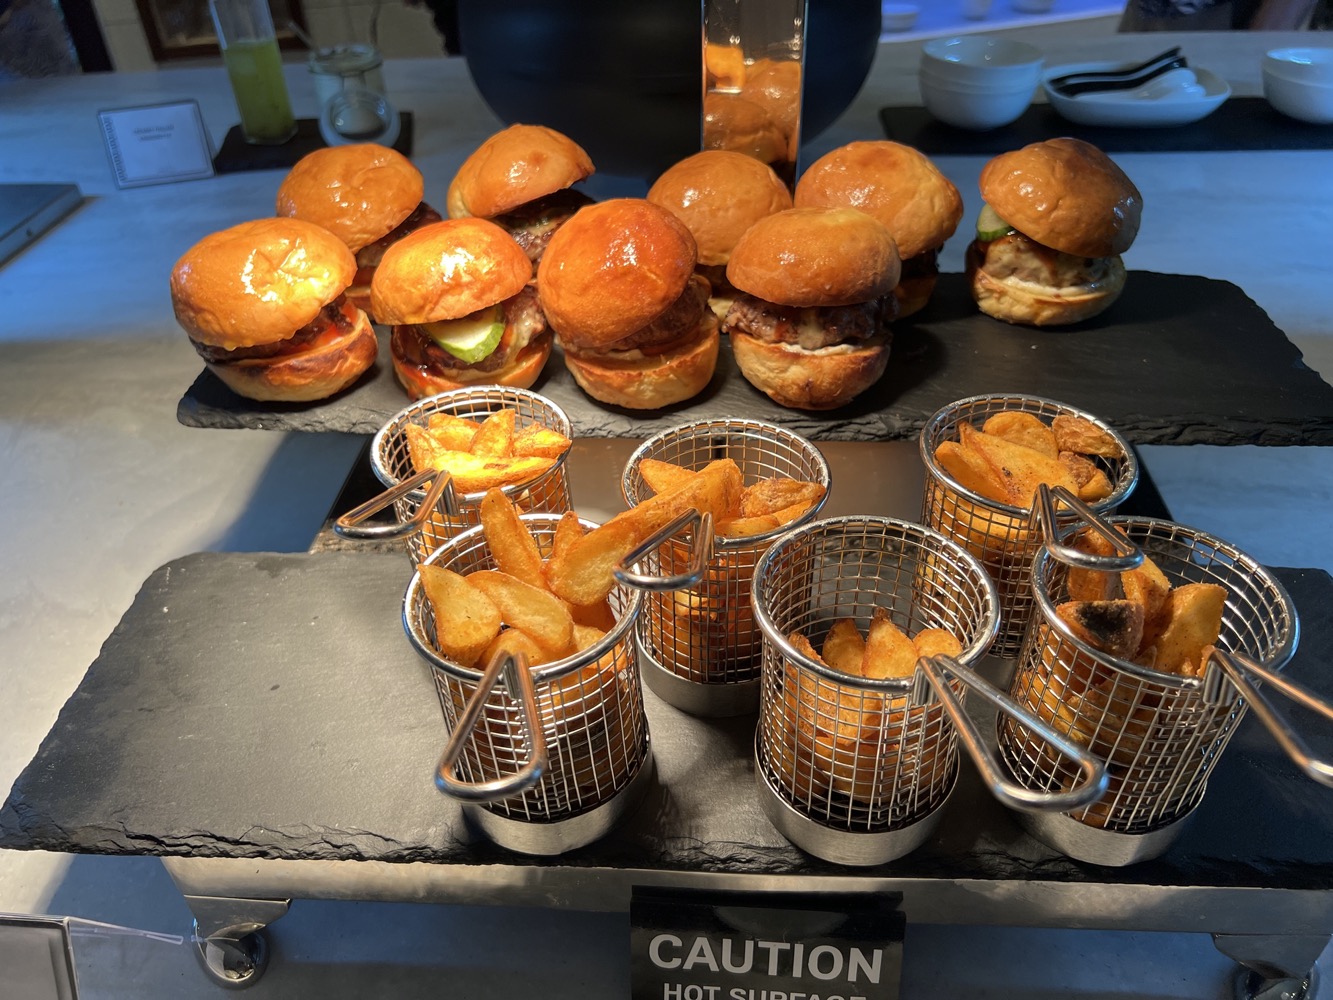 a group of burgers and fries on a table